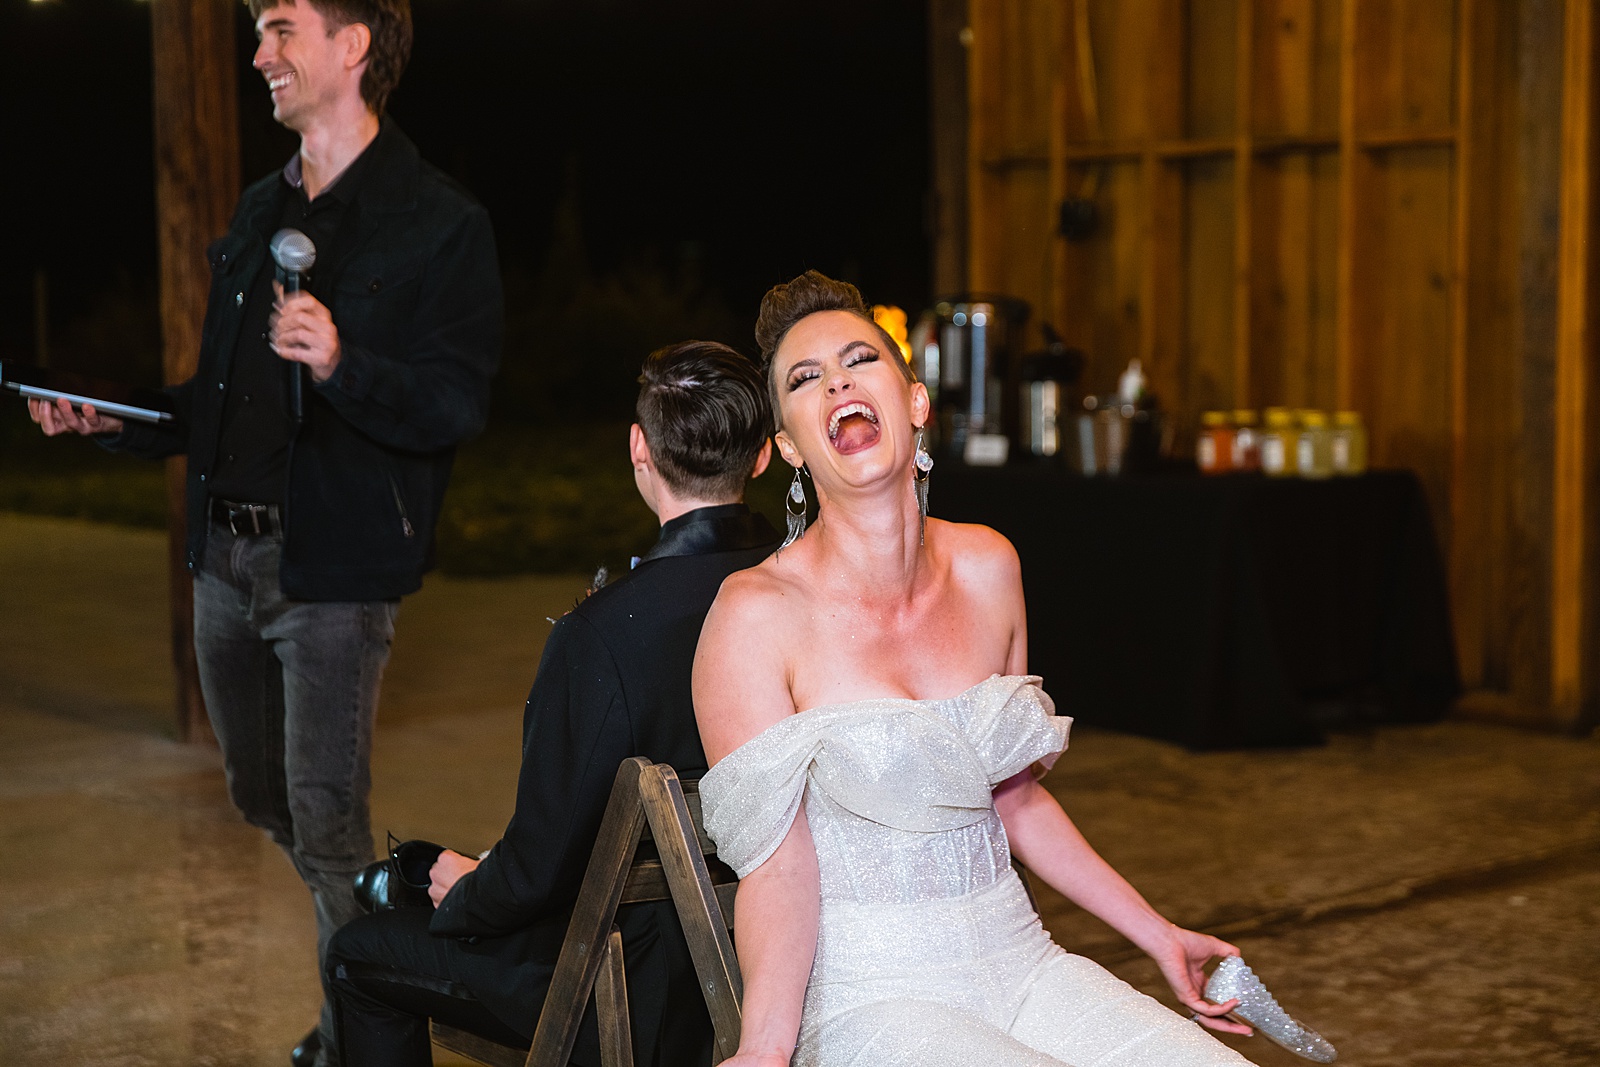 Same sex couple play newlywed game during wedding reception at Mortimer Farms by Arizona wedding photographer PMA Photography.